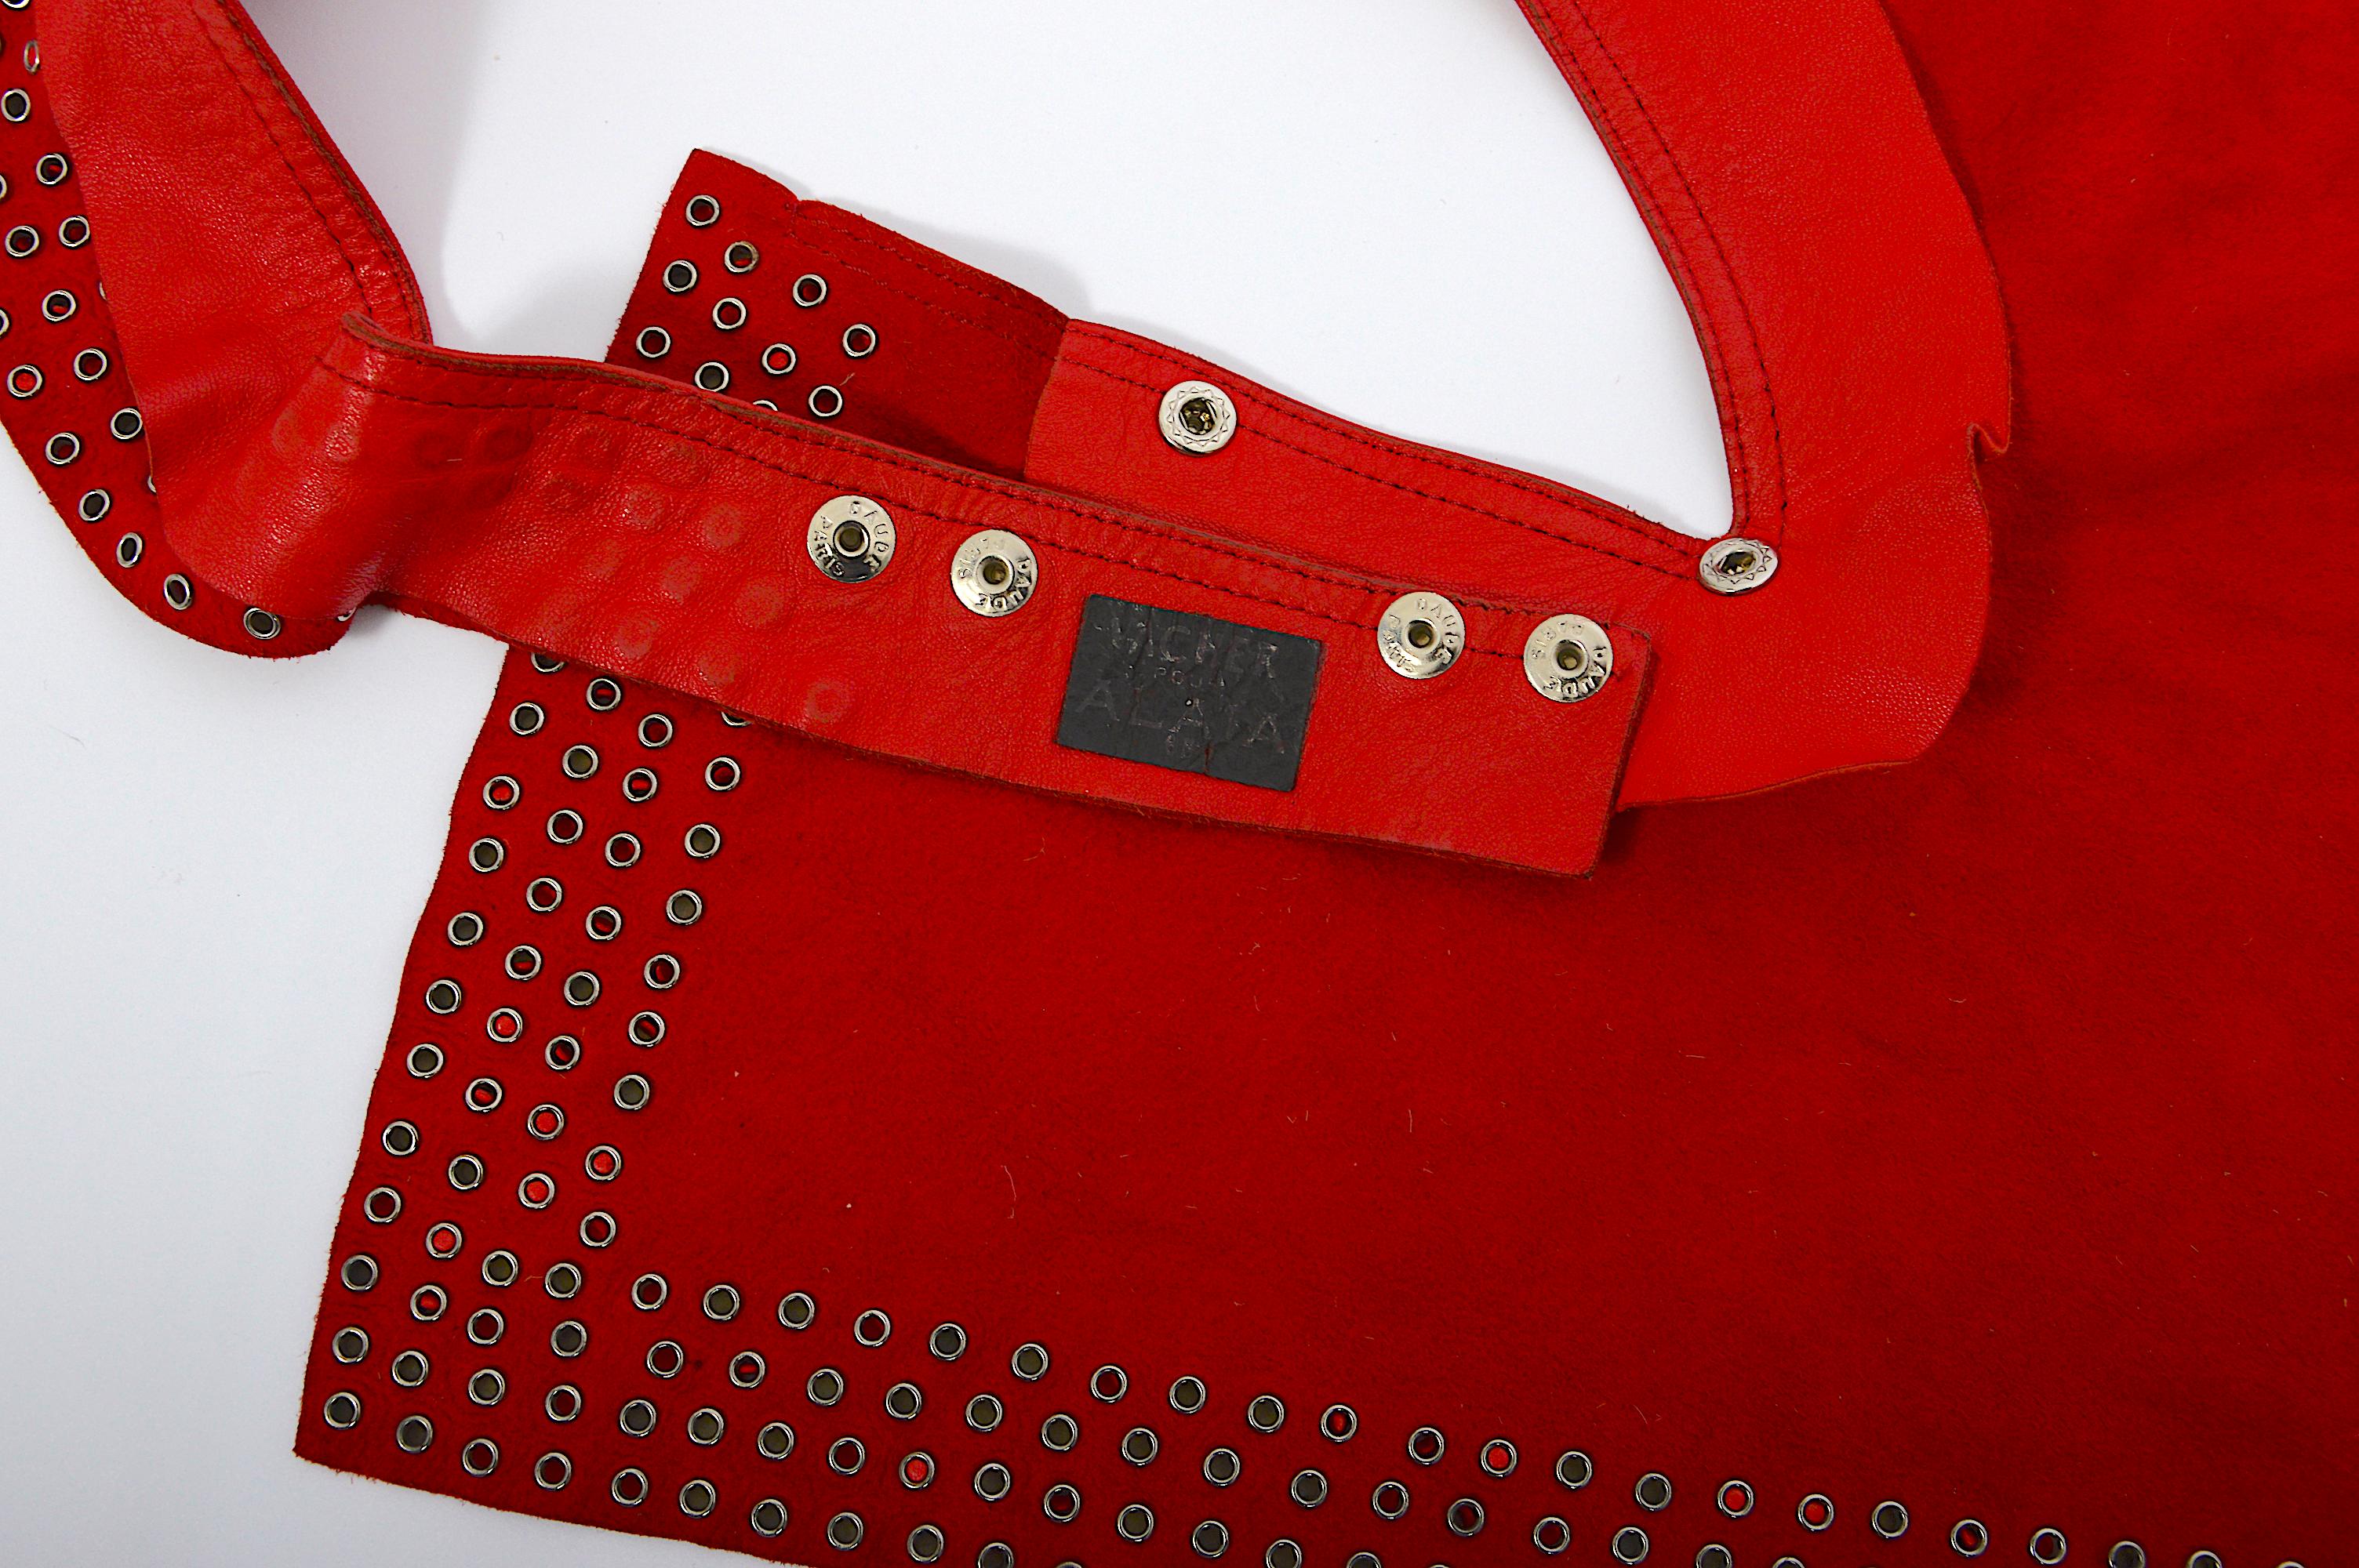 Azzedine Alaia circa 1981 collectionneurs Studded embellished red leather belt skirt en vente 11